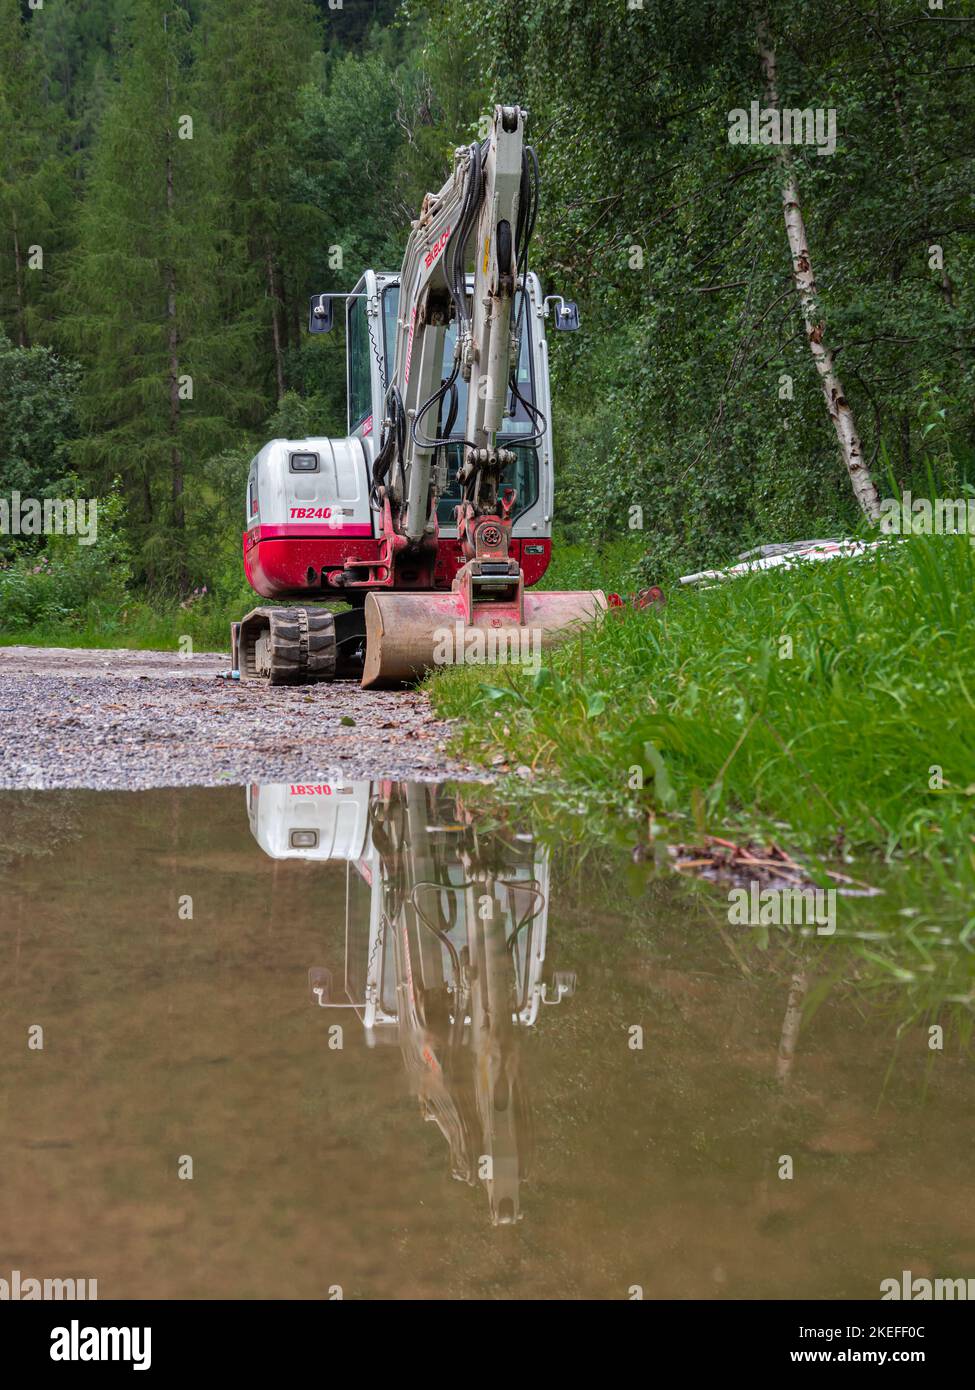 Umhausen, Austria - July 26, 2022: A working machine - a digger - and its reflection in a rain puddle Stock Photo